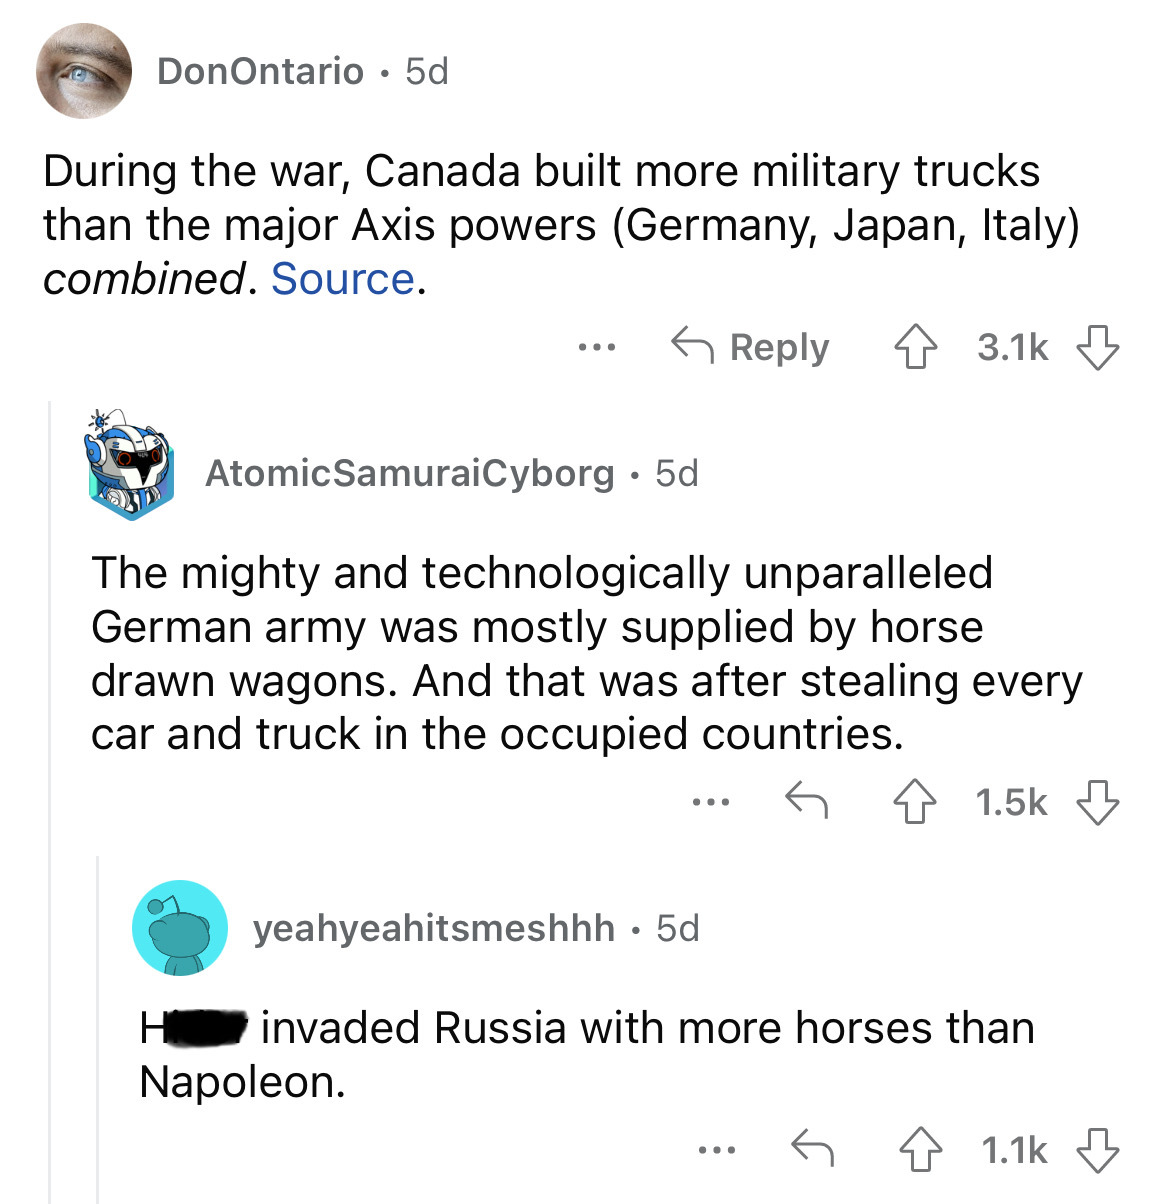 angle - DonOntario. 5d During the war, Canada built more military trucks than the major Axis powers Germany, Japan, Italy combined. Source. ... AtomicSamuraiCyborg. 5d The mighty and technologically unparalleled German army was mostly supplied by horse dr